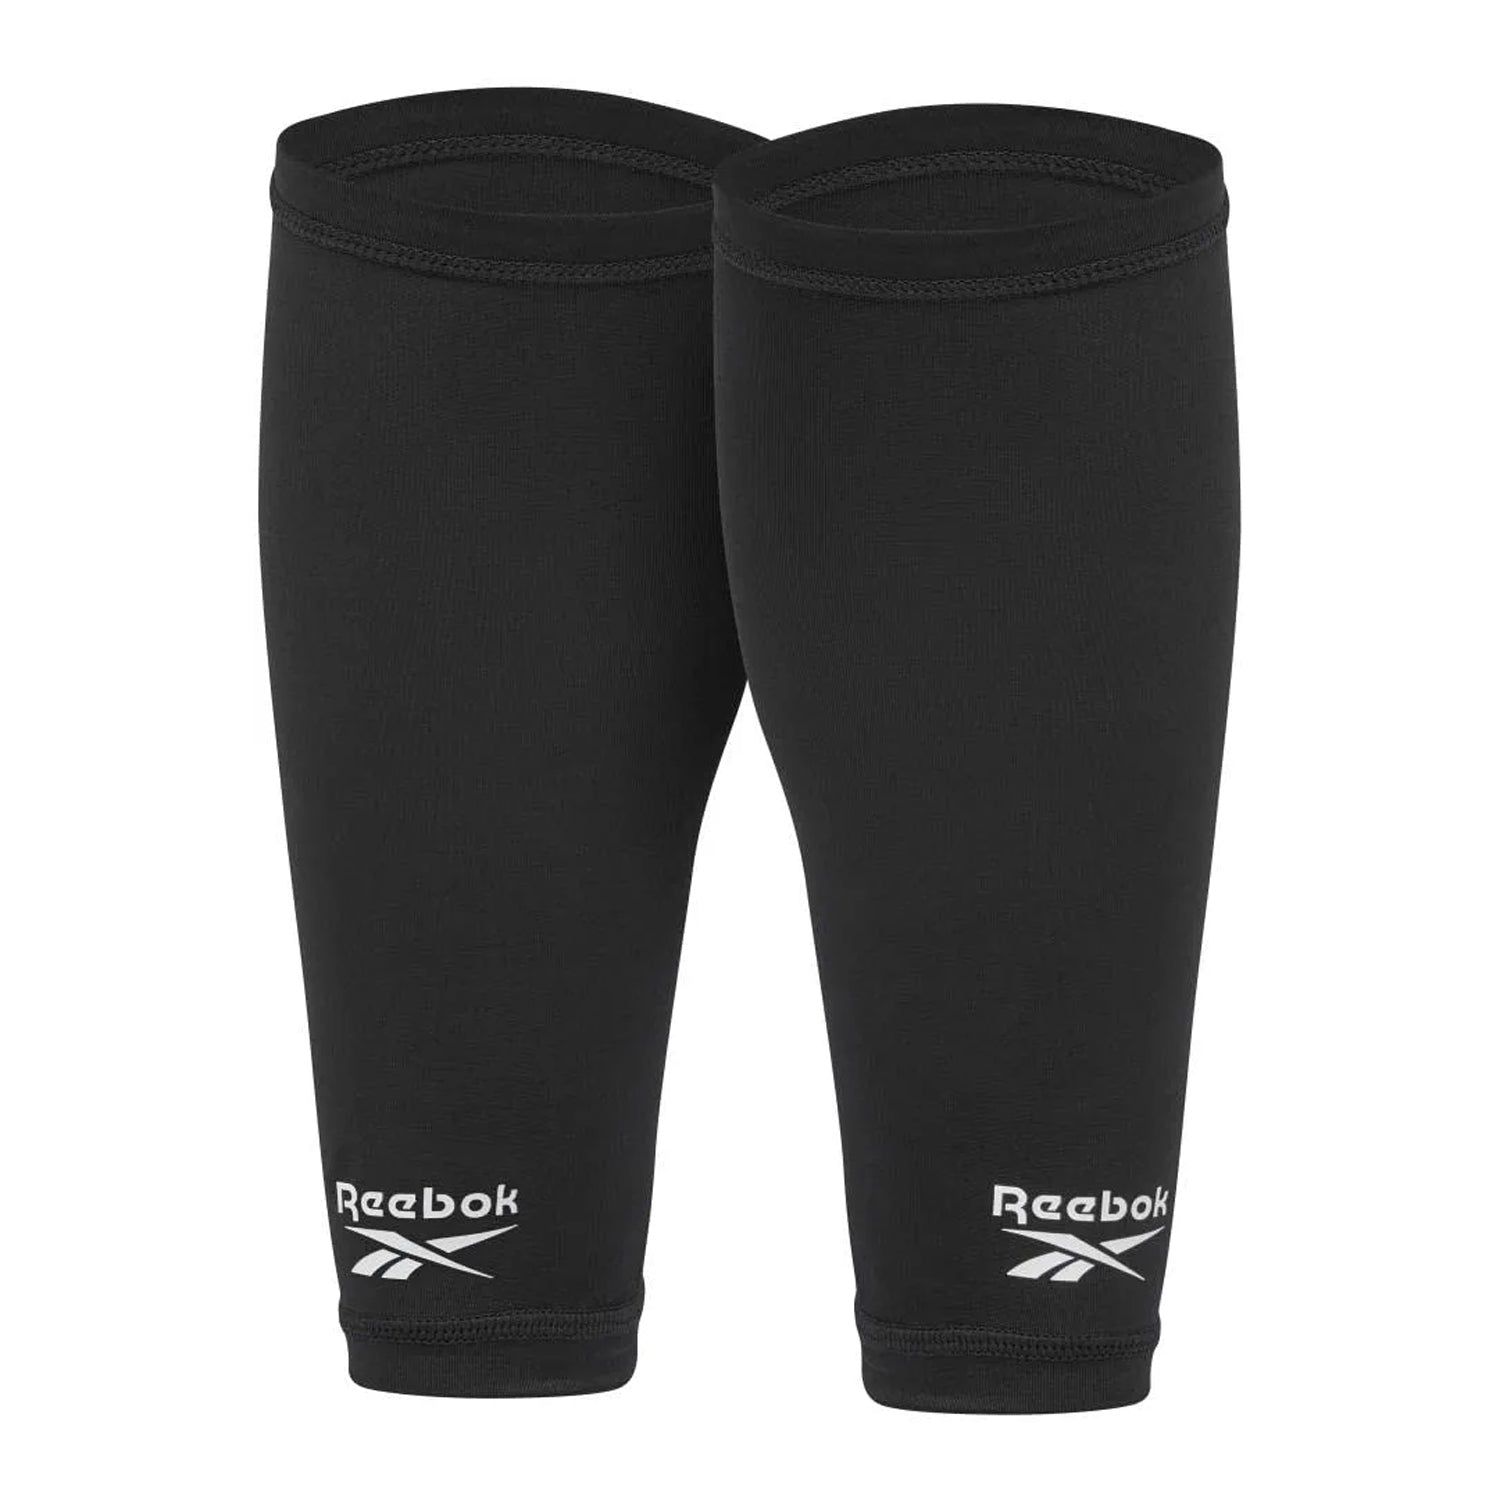 Reebok Calf Compression Sleeves for Women and Men, Black